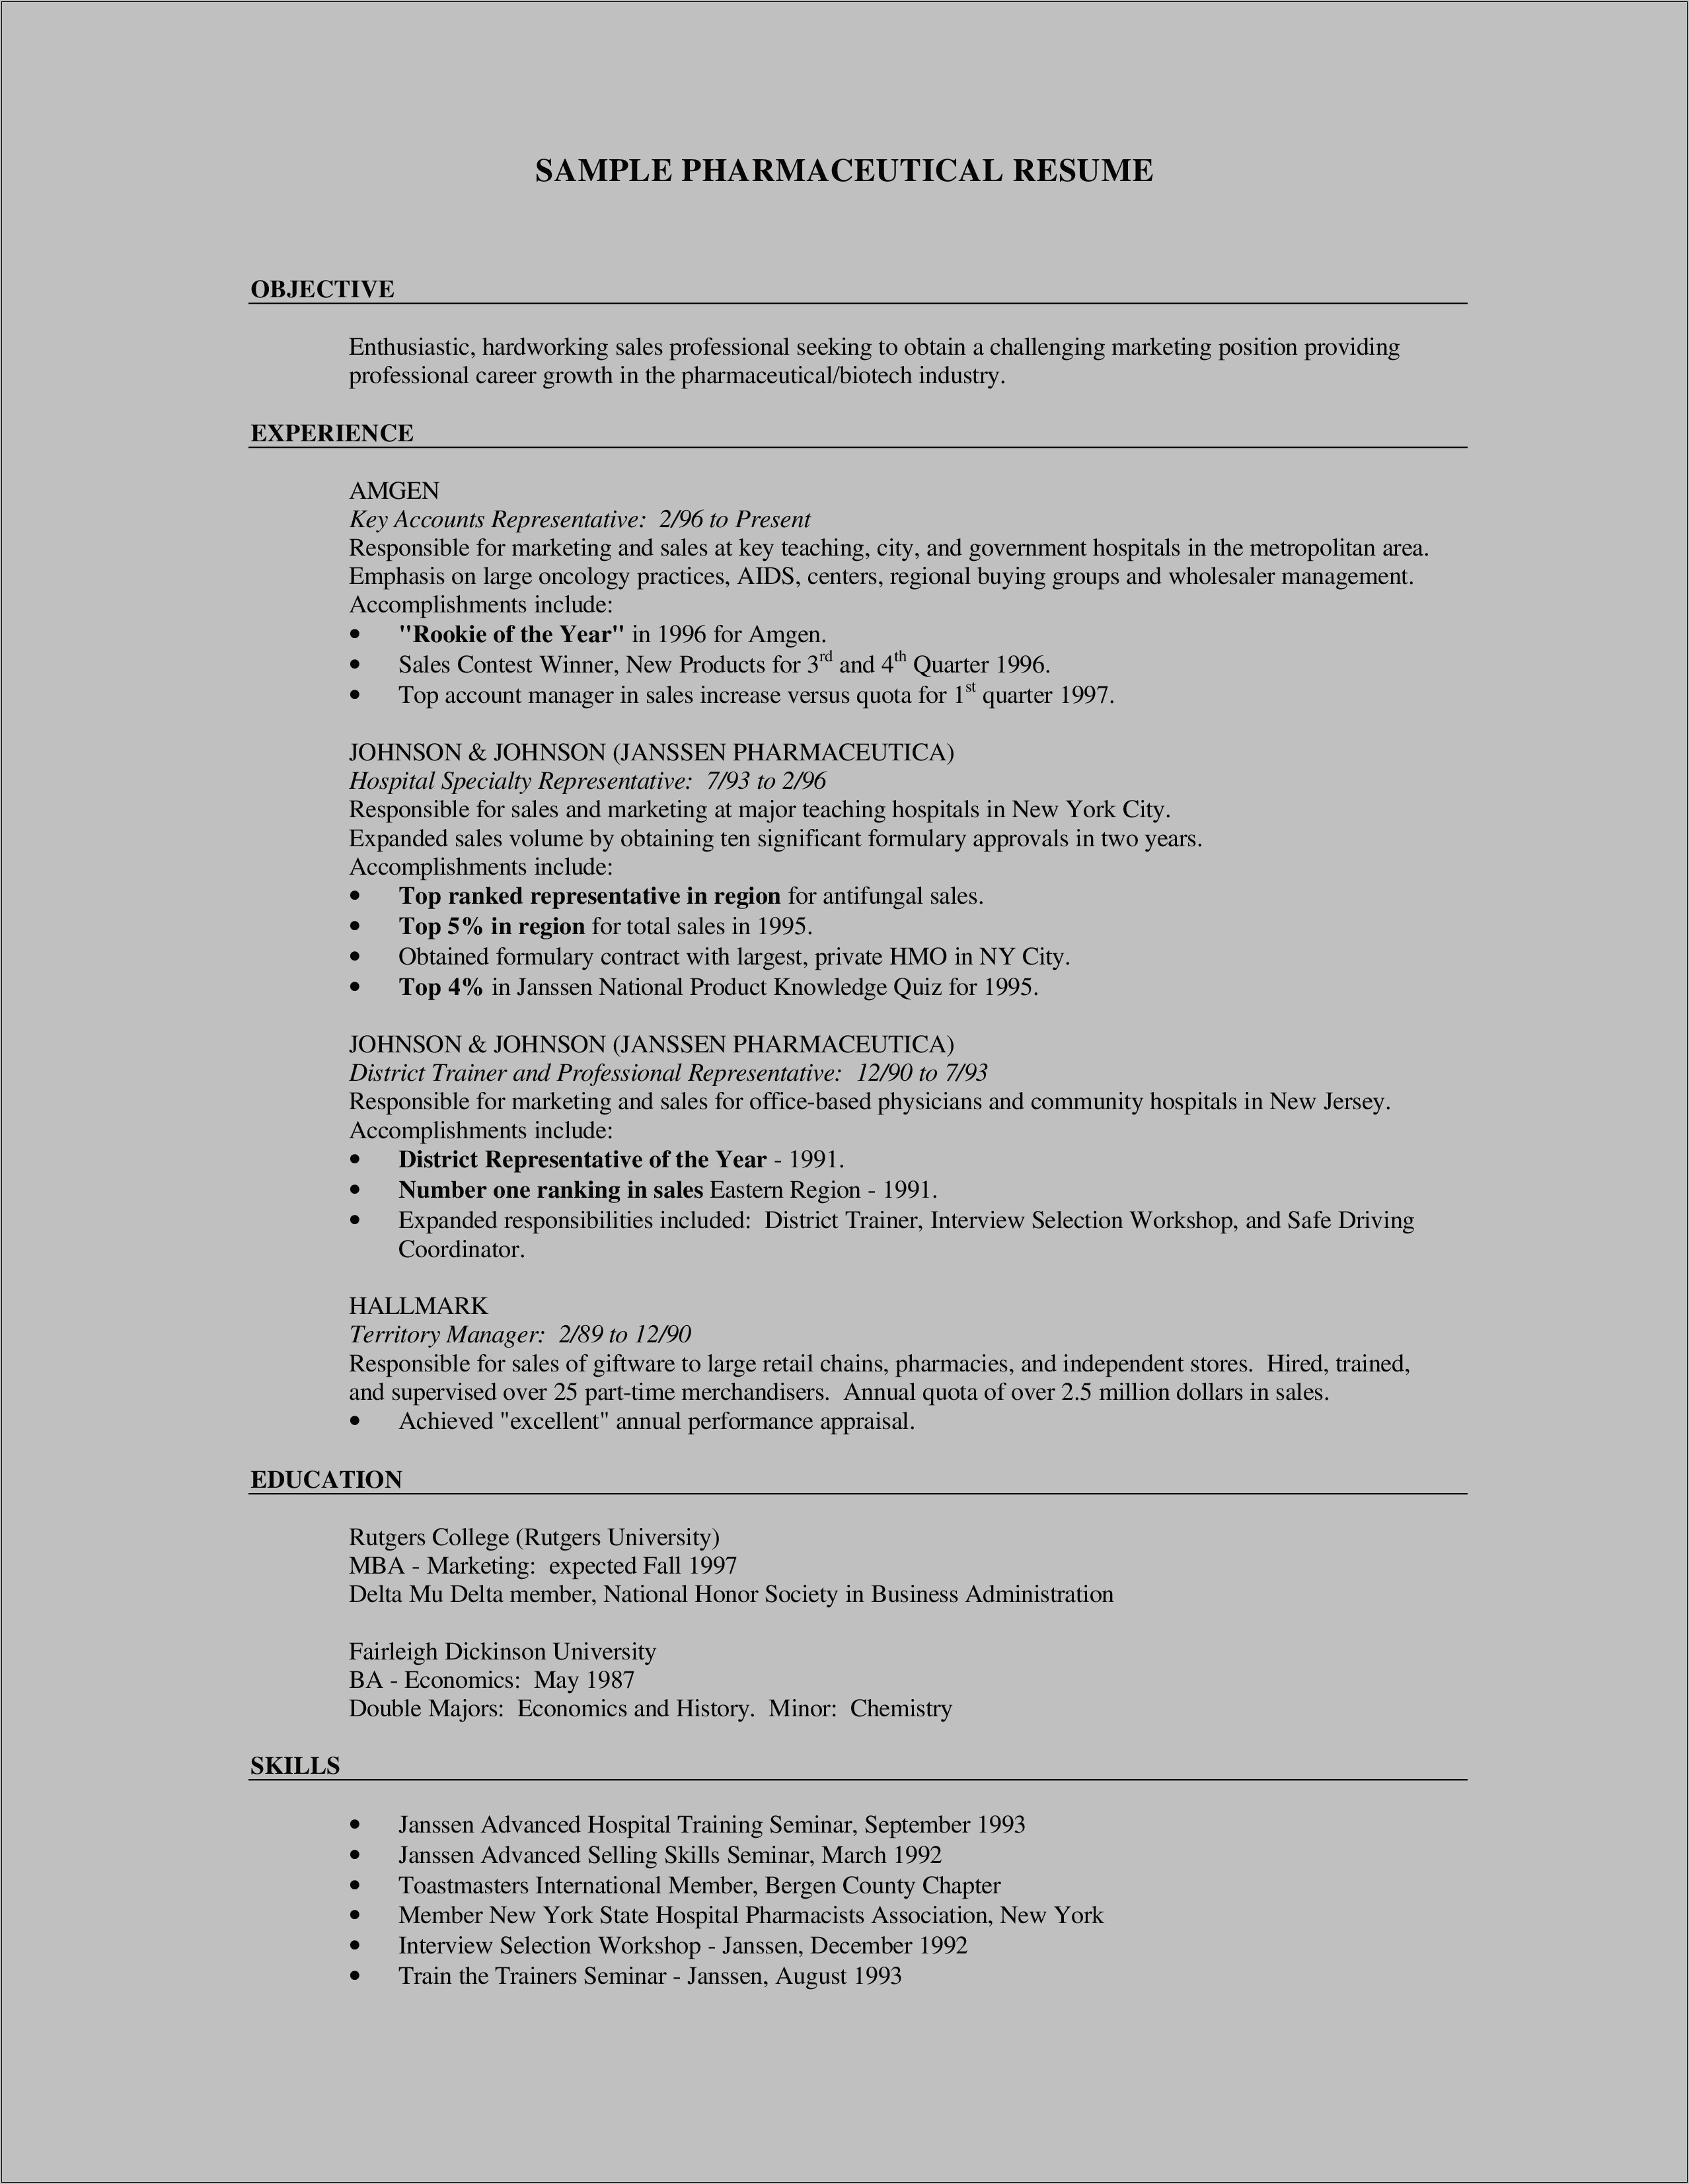 Resume For Marketing Manager In Hospital